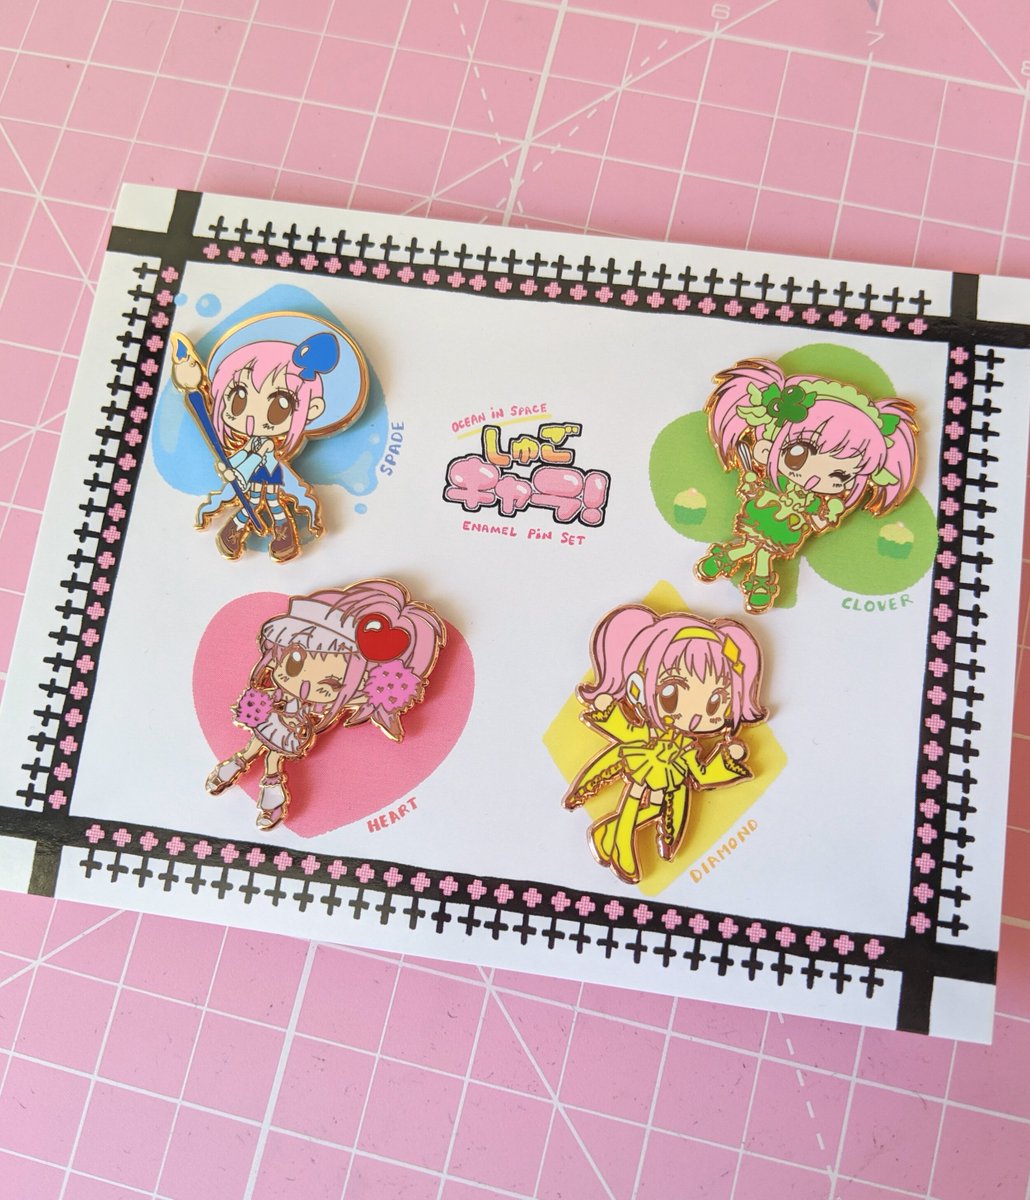 New magical girl enamel pin pre-orders are up now~> https://t.co/uLYmFR4vvx
Thanks all!⭐️ 